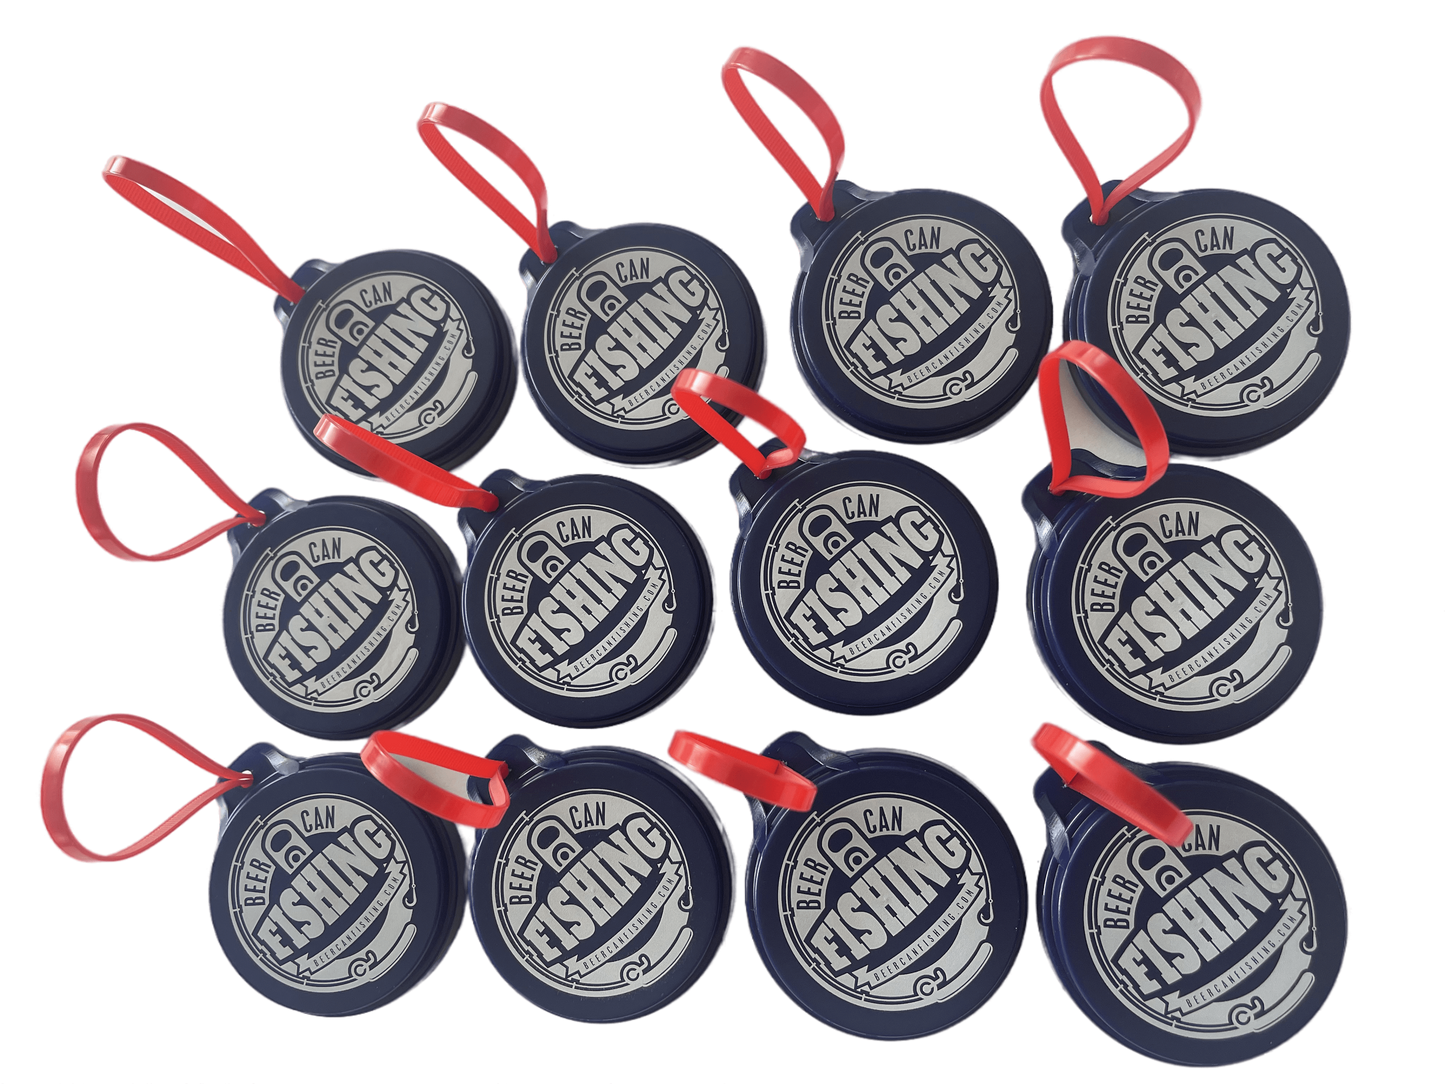 12 pack of beer can fishing game lids